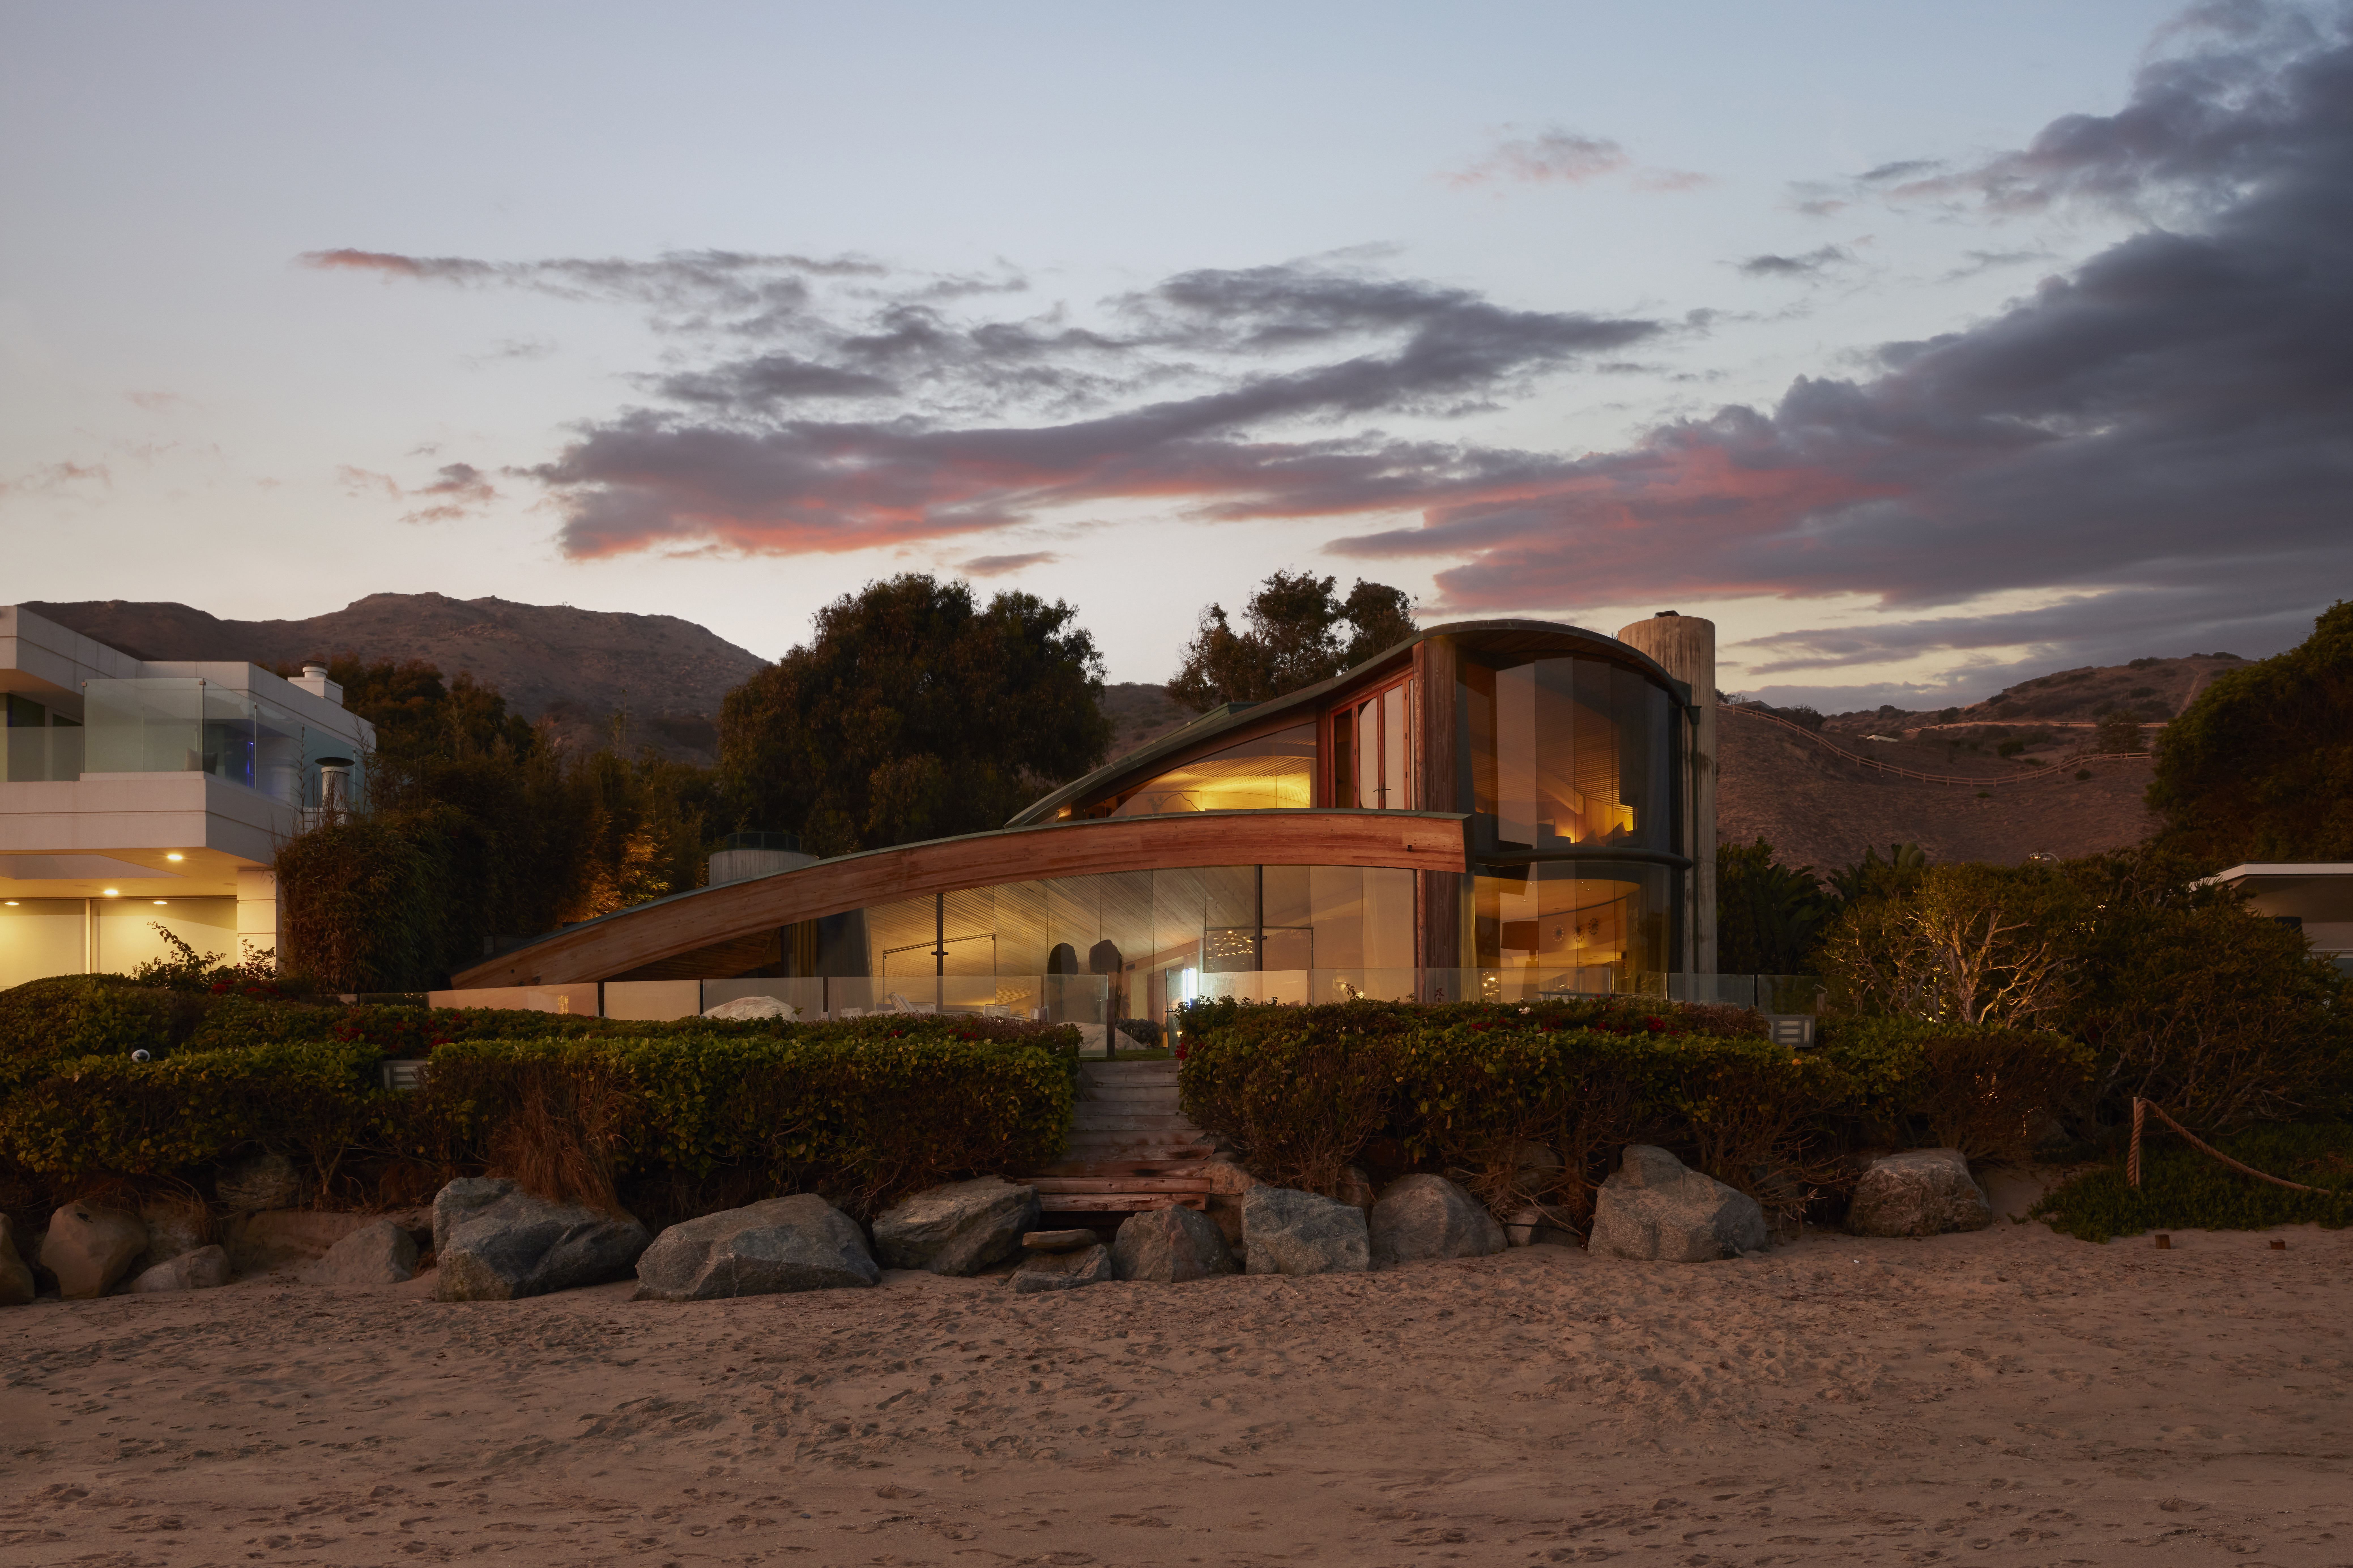 The Segel House by John Lautner, photographed by Roger Davies